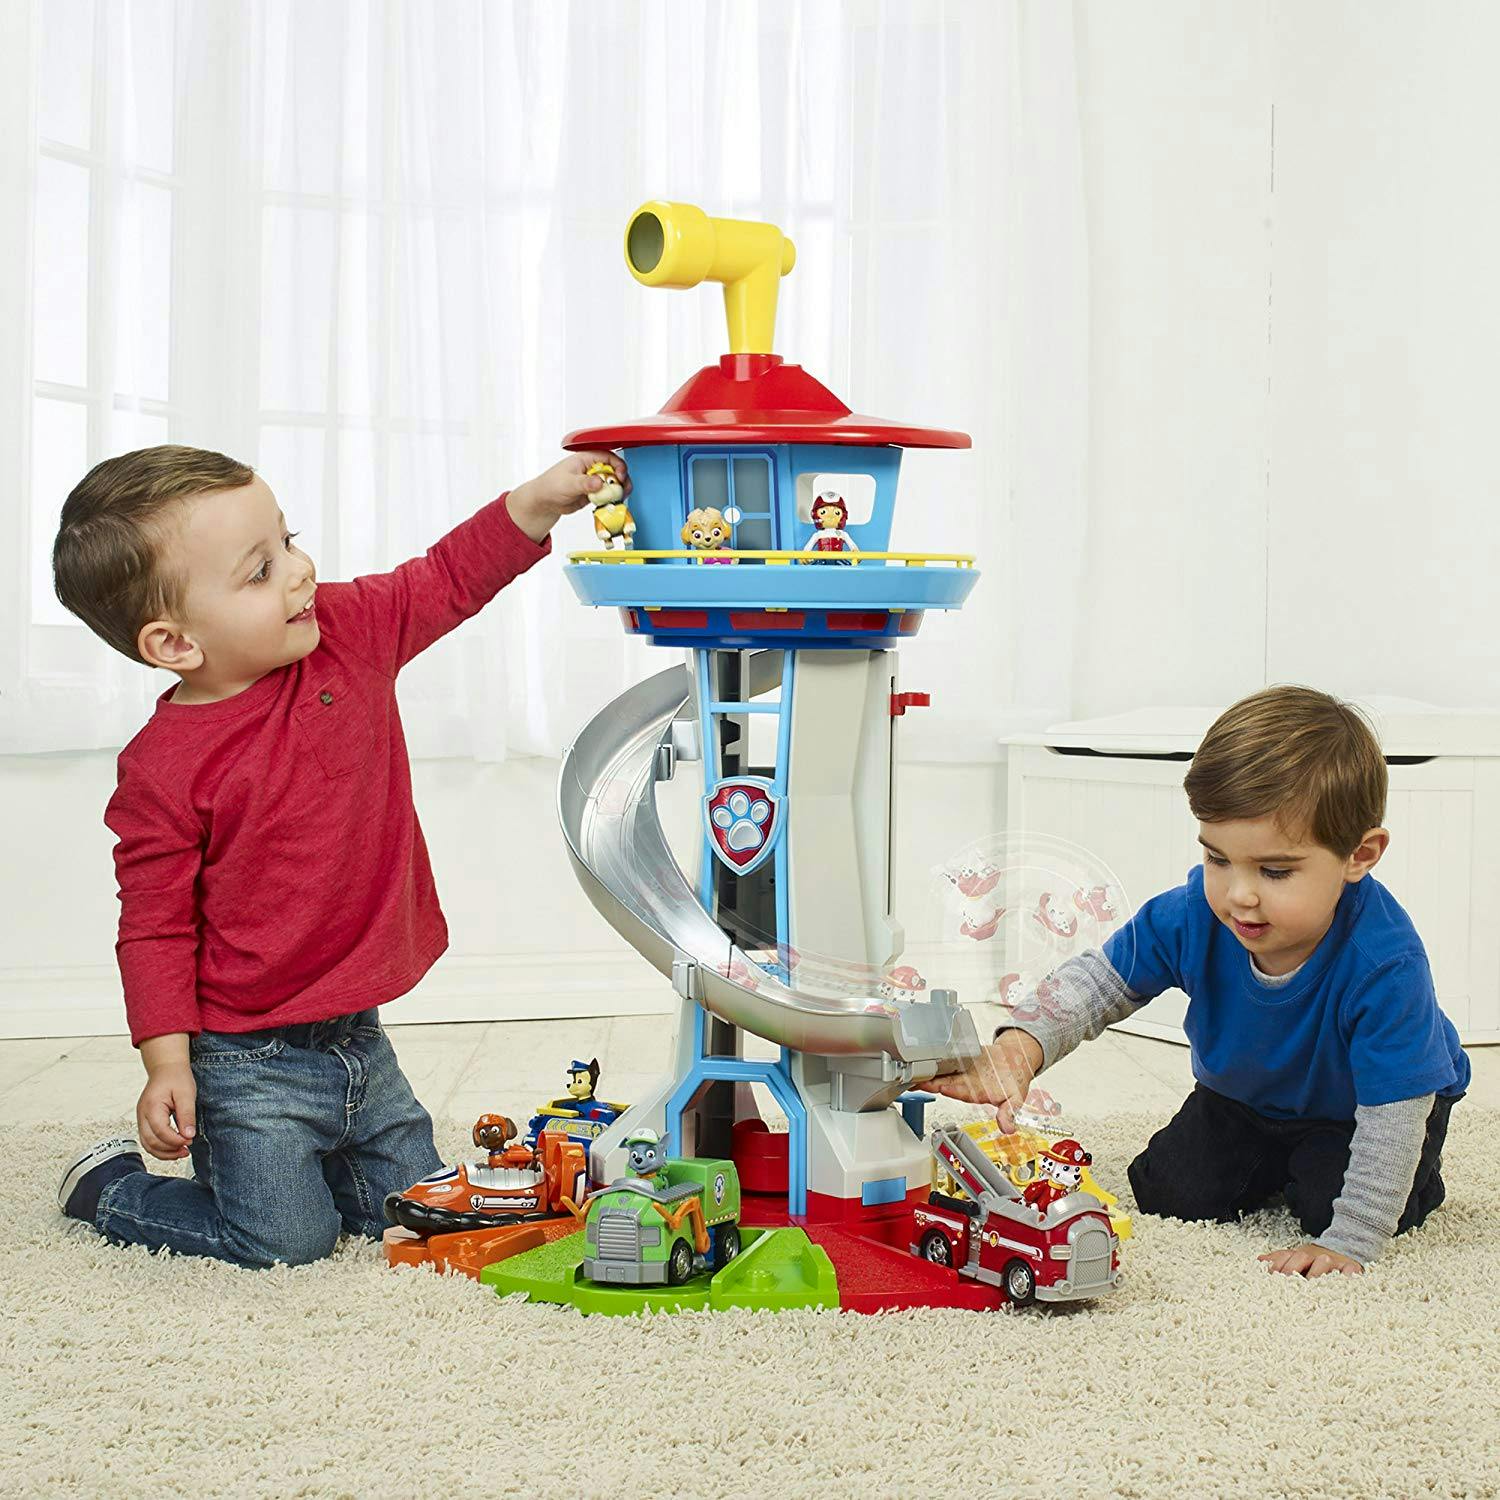 paw patrol my size lookout tower kohls